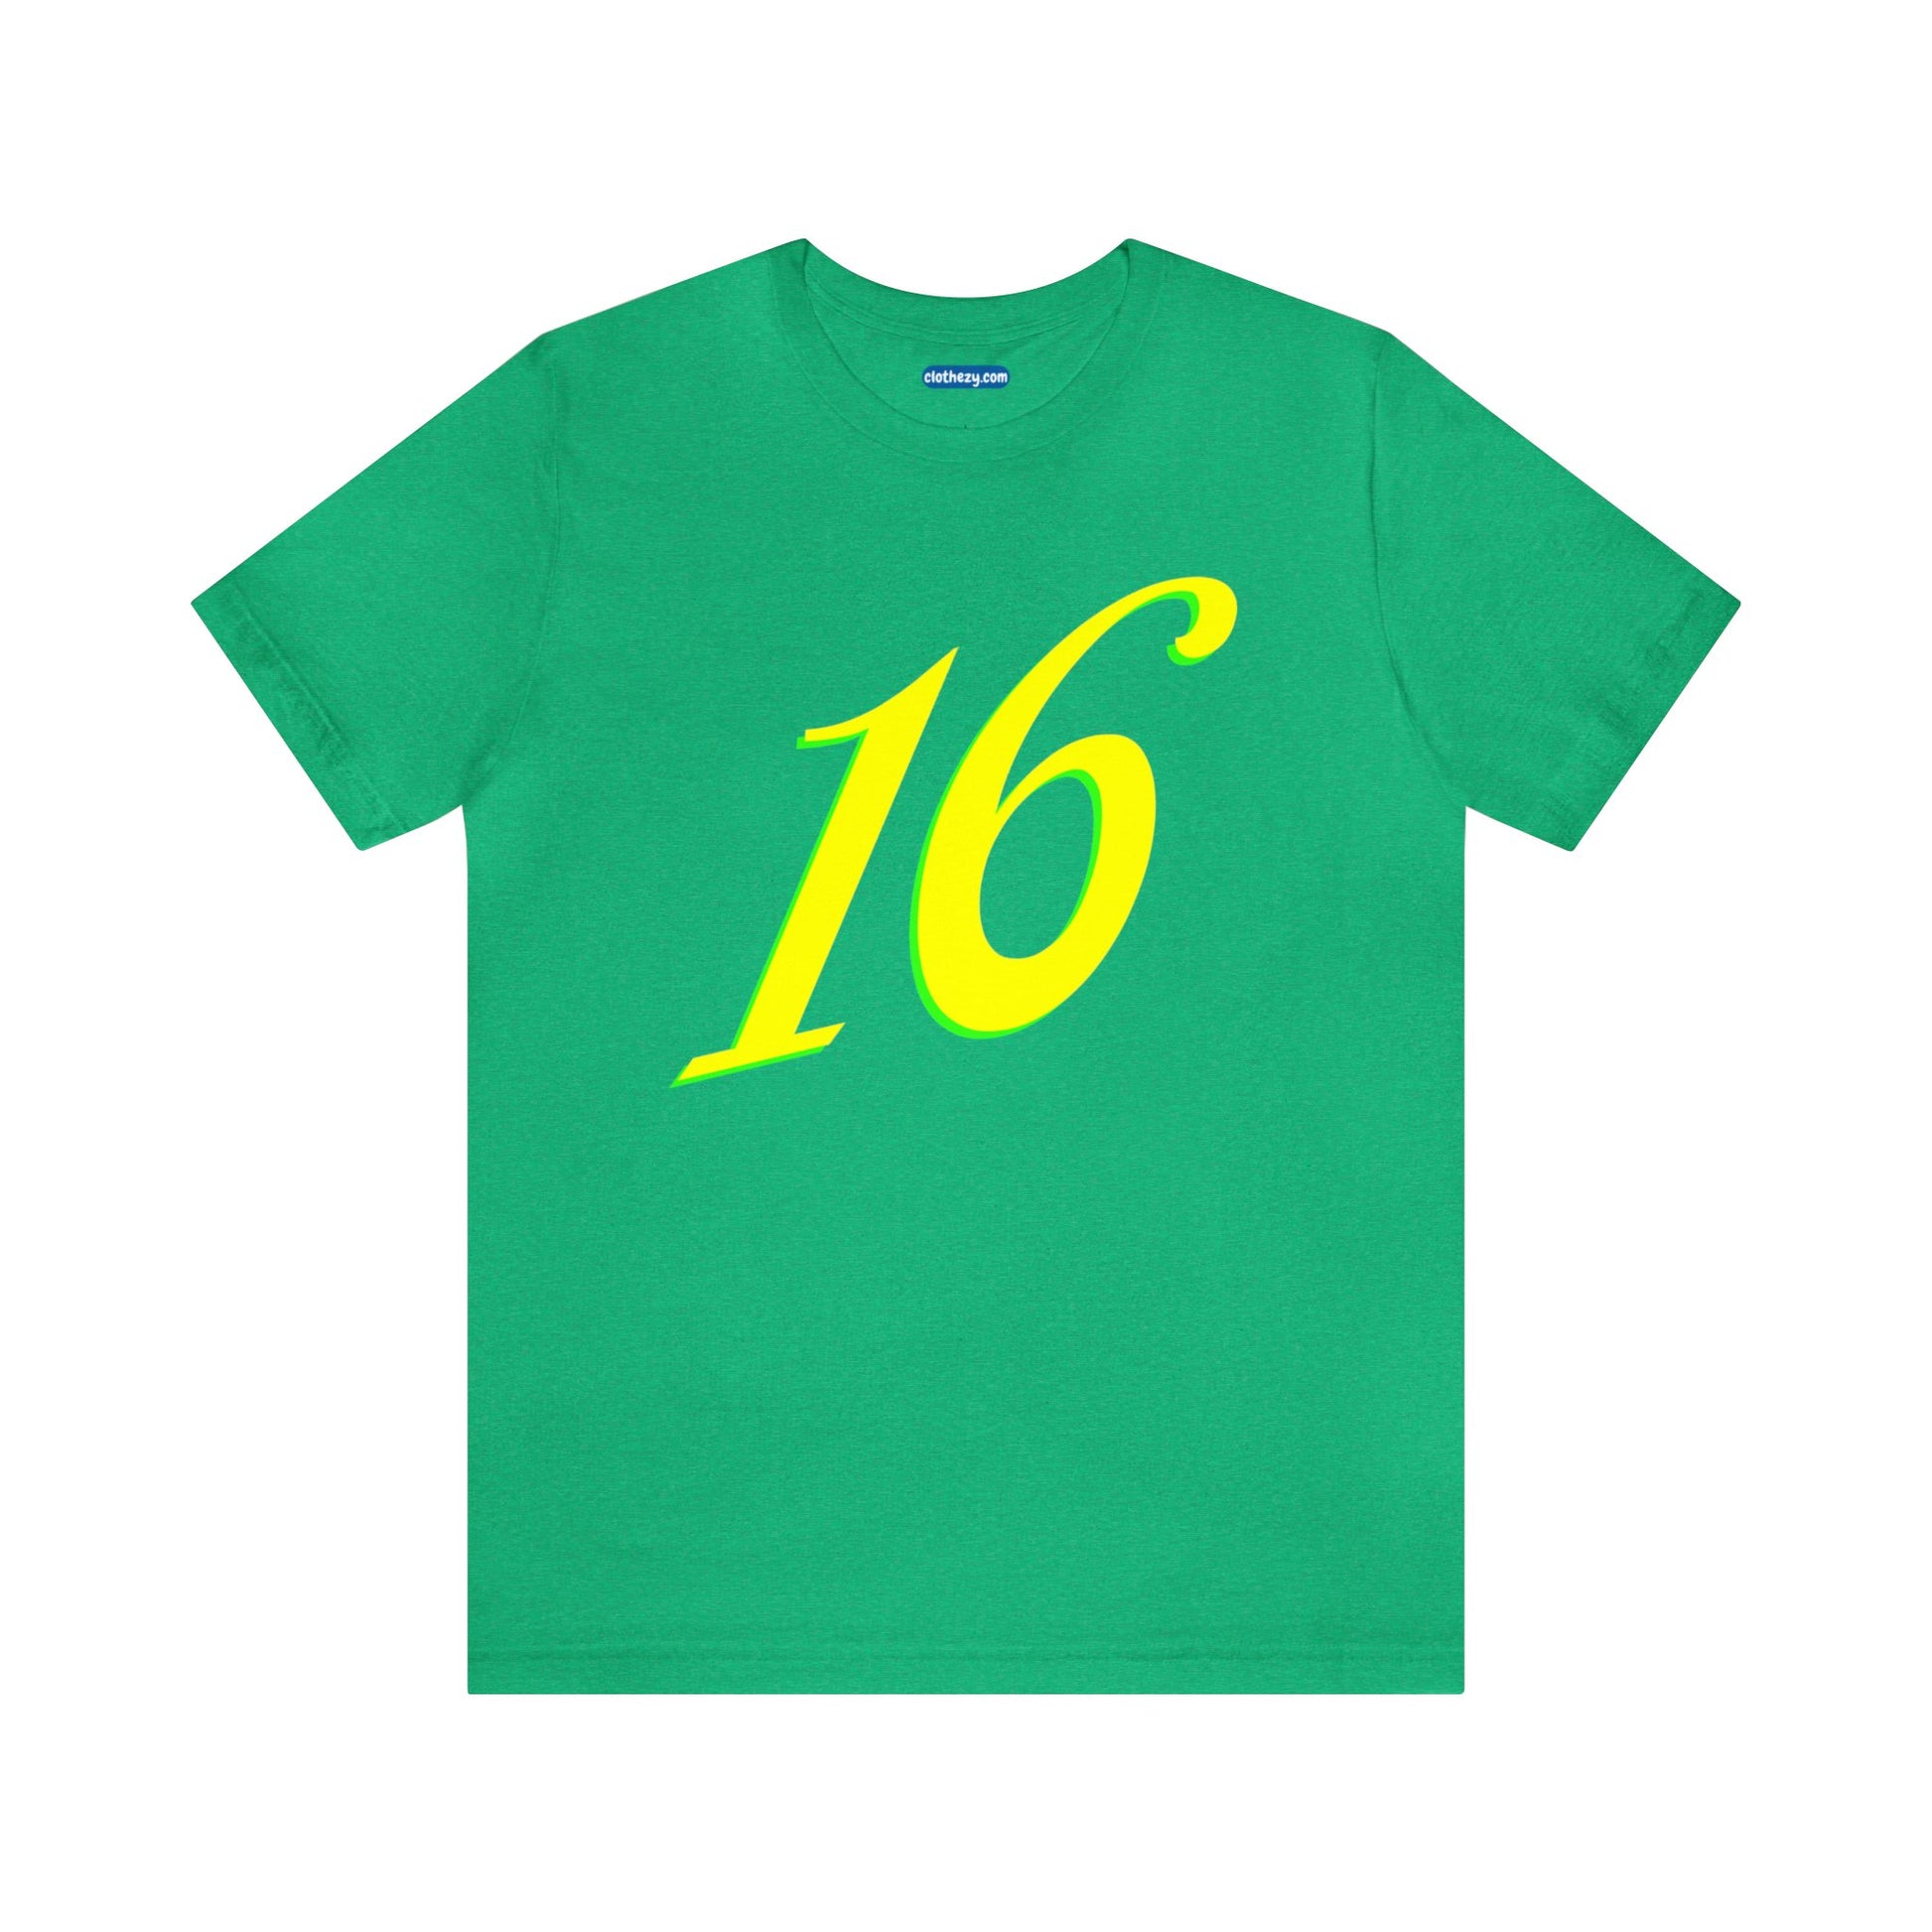 Number 16 Design - Soft Cotton Tee for birthdays and celebrations, Gift for friends and family, Multiple Options by clothezy.com in Royal Blue Heather Size Small - Buy Now